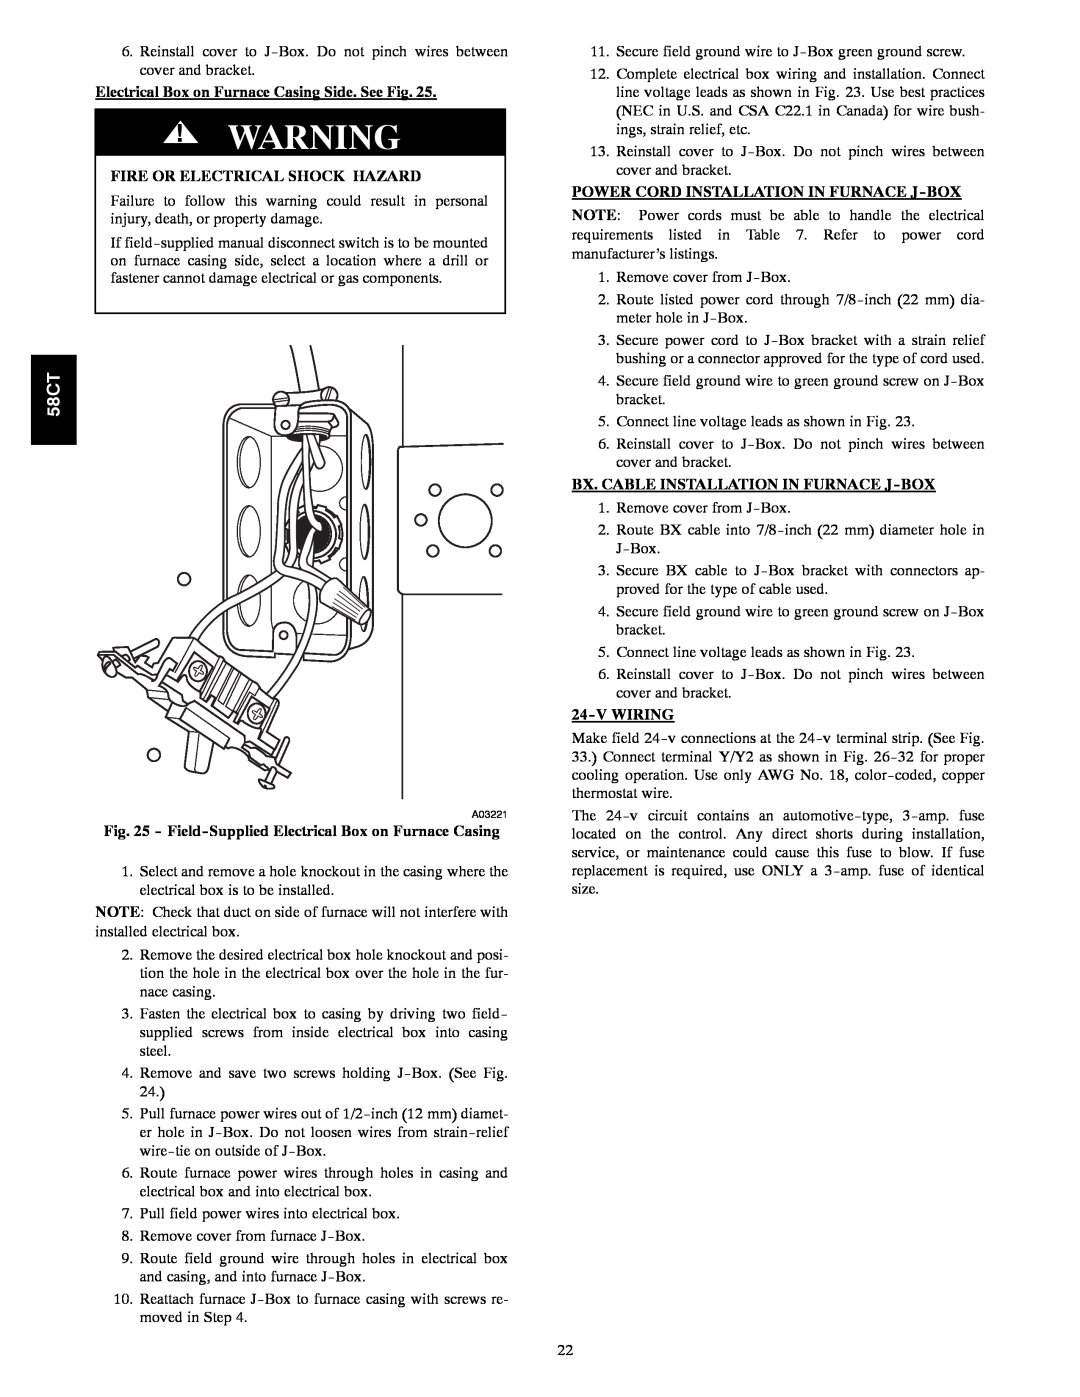 Carrier 58CTA/CTX Electrical Box on Furnace Casing Side. See Fig, Fire Or Electrical Shock Hazard, Vwiring 